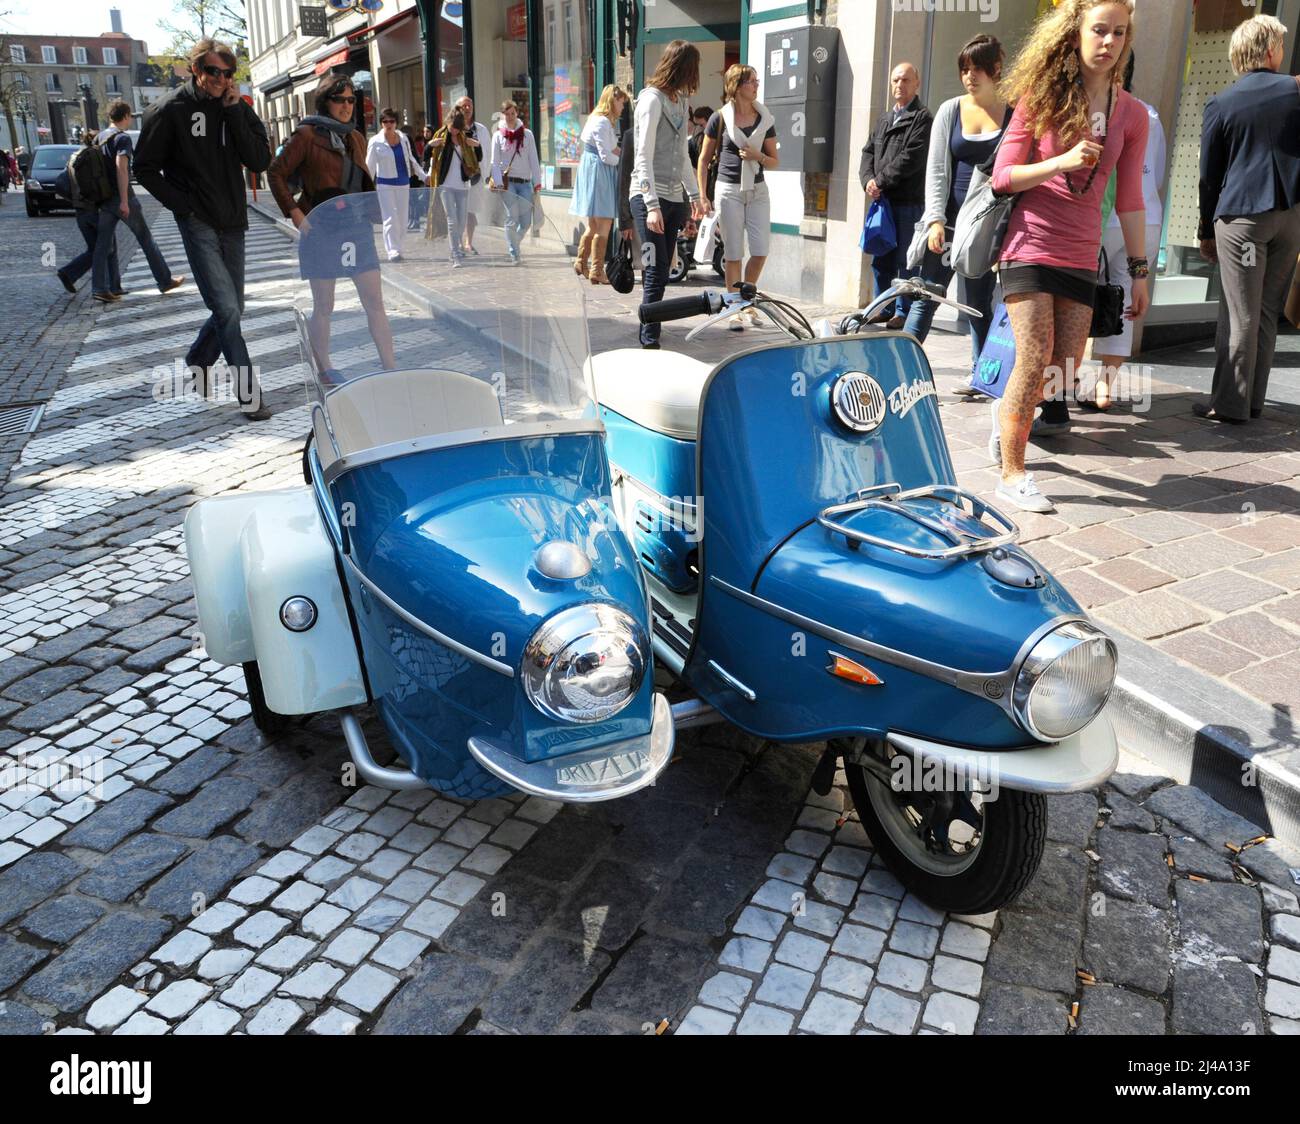 Cezeta La Boheme Motorcycle with Druzeta Sidecar. Bruges, Belgium. The Čezeta is a motor scooter manufactured from 1957 to 1964. Stock Photo